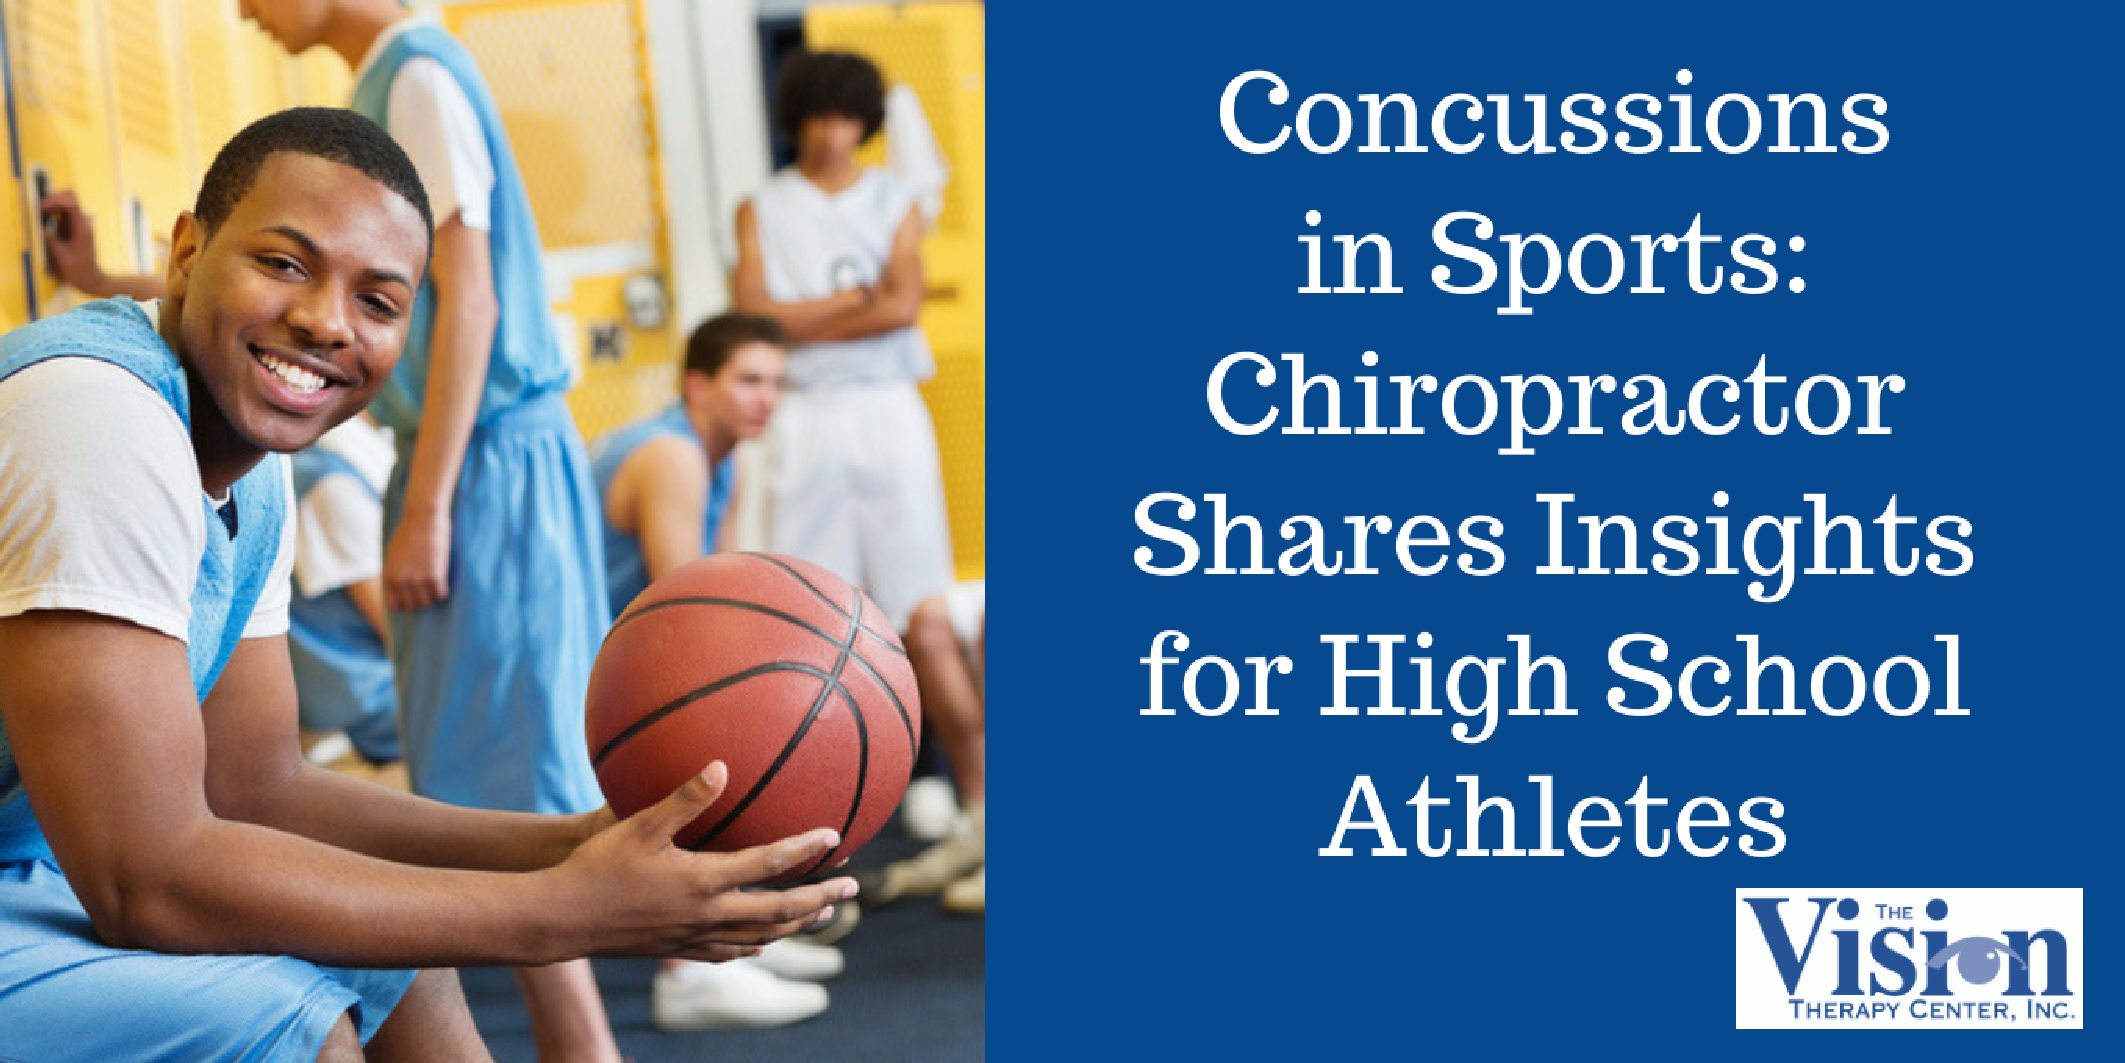 Concussions in Sports: Chiropractor Shares Insights for High School Athletes